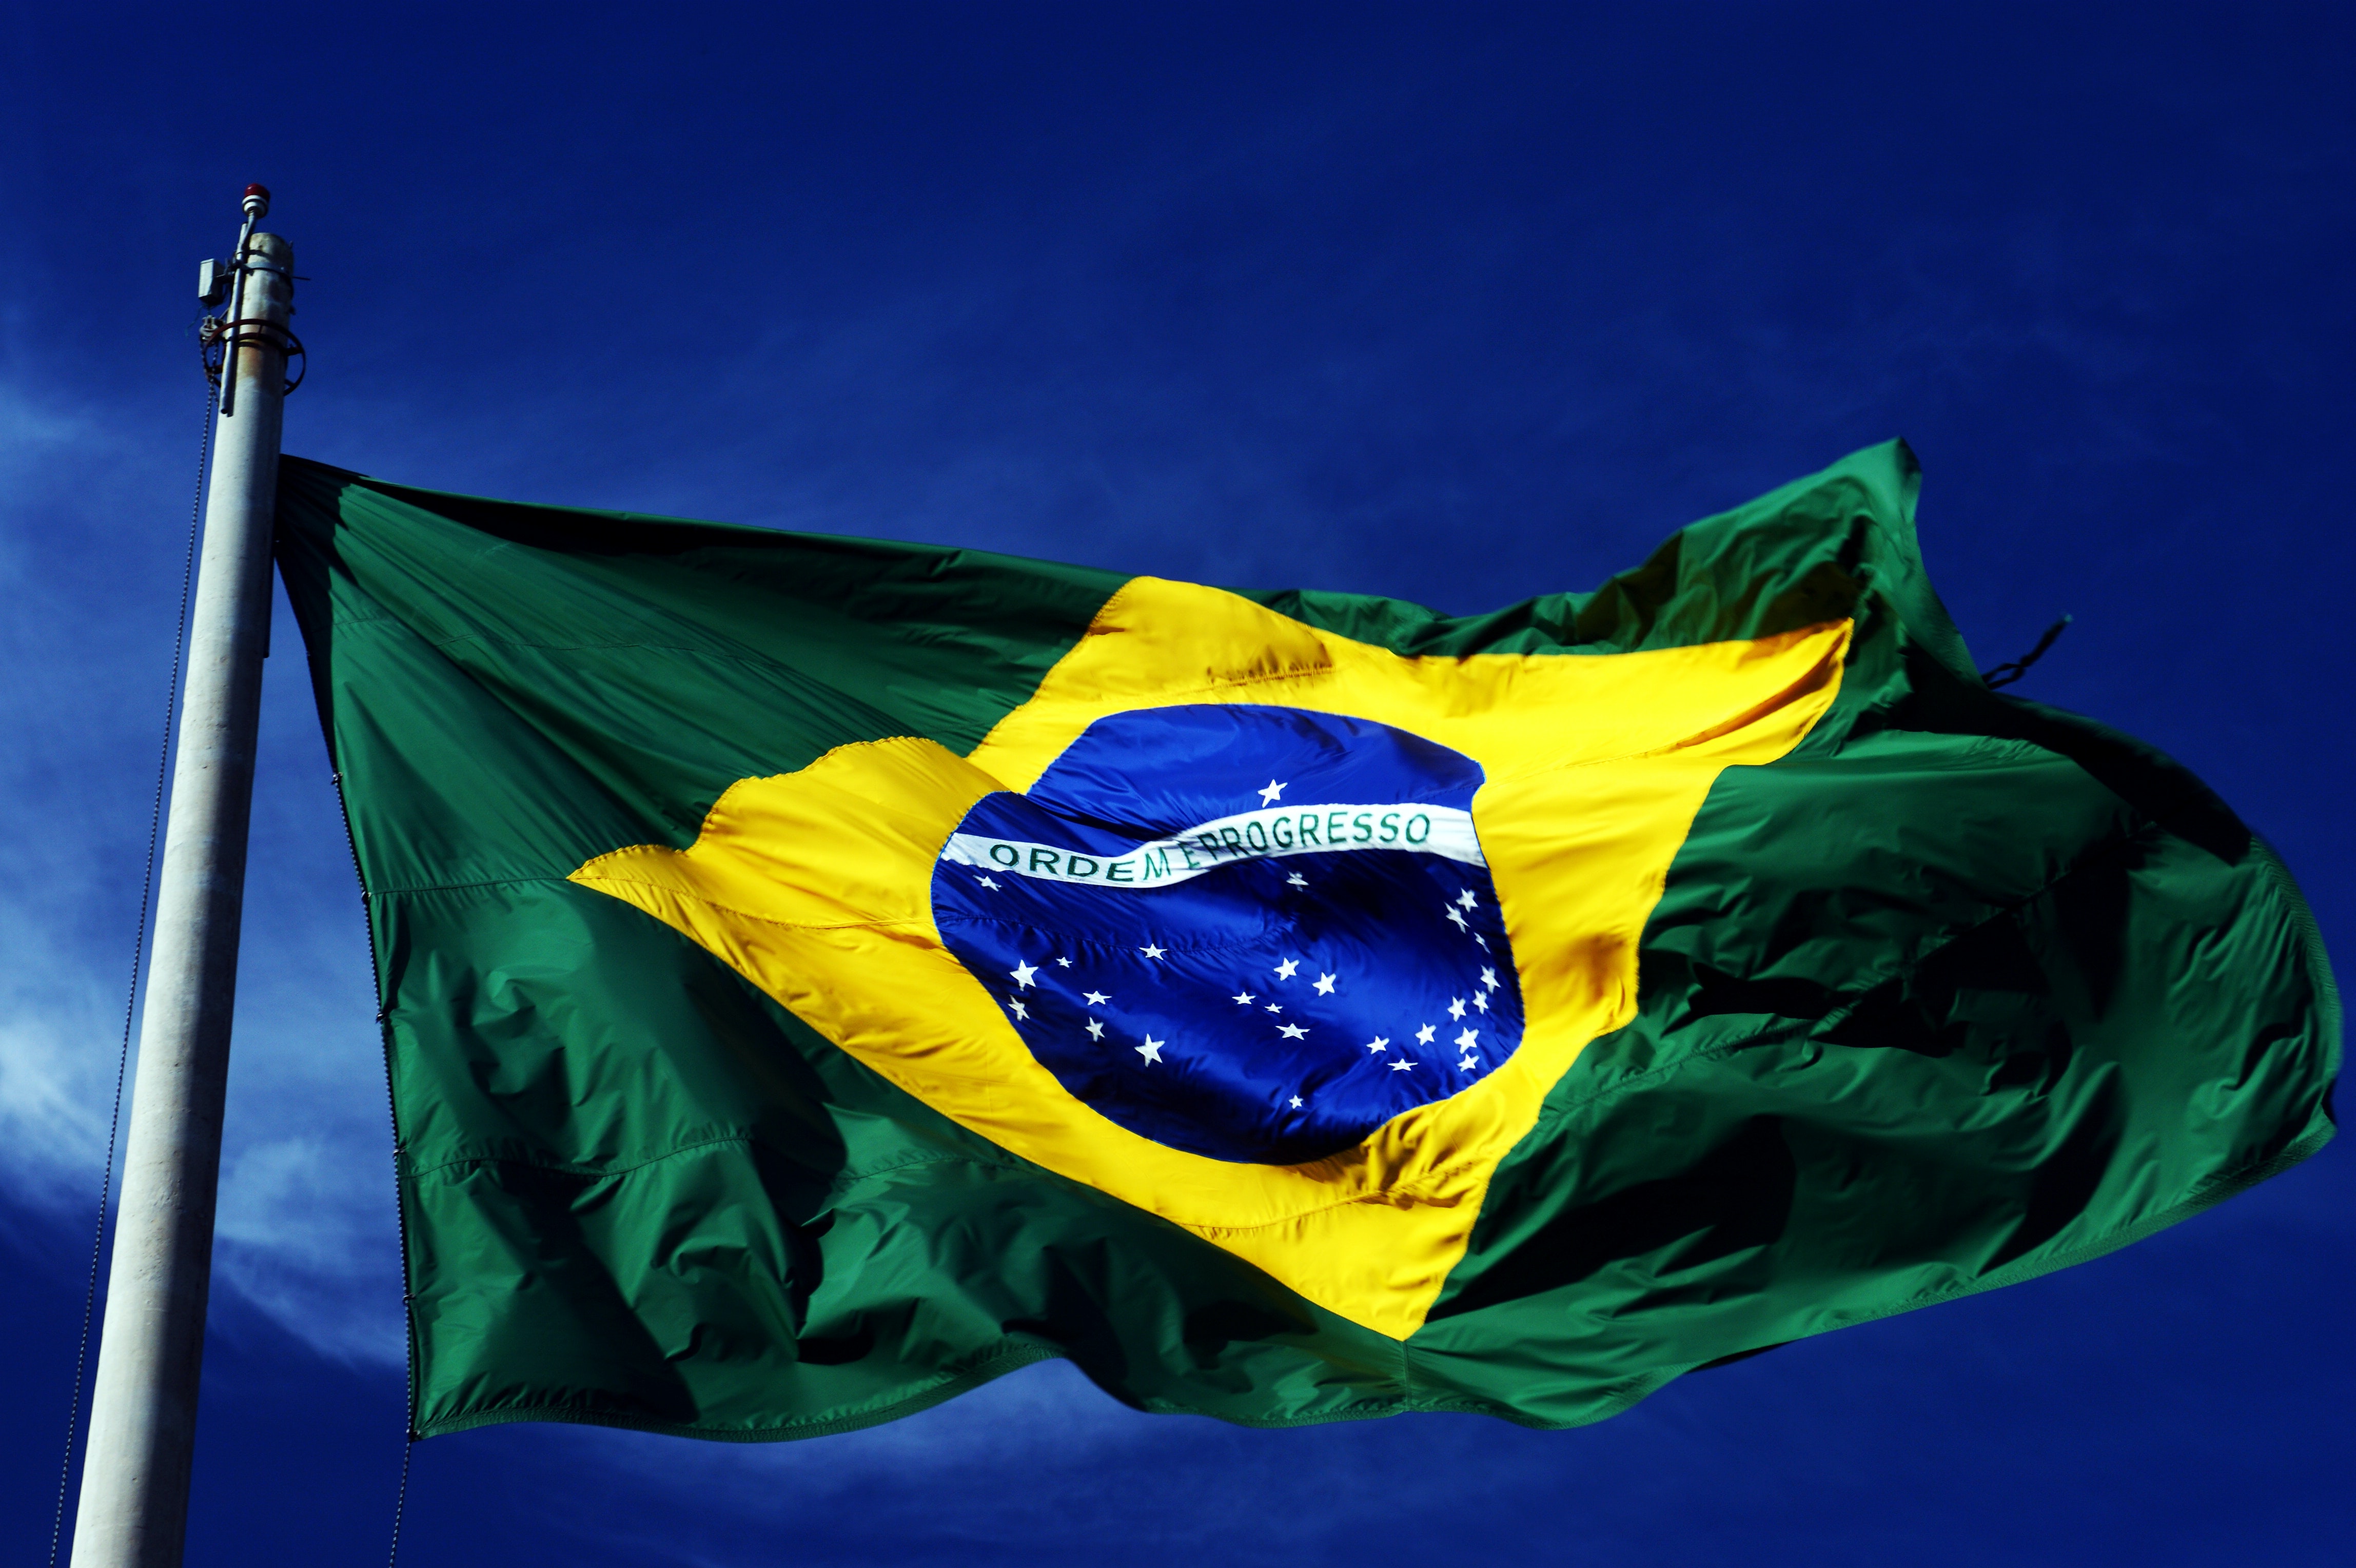 Brazil flag photos download the best free brazil flag stock photos hd images